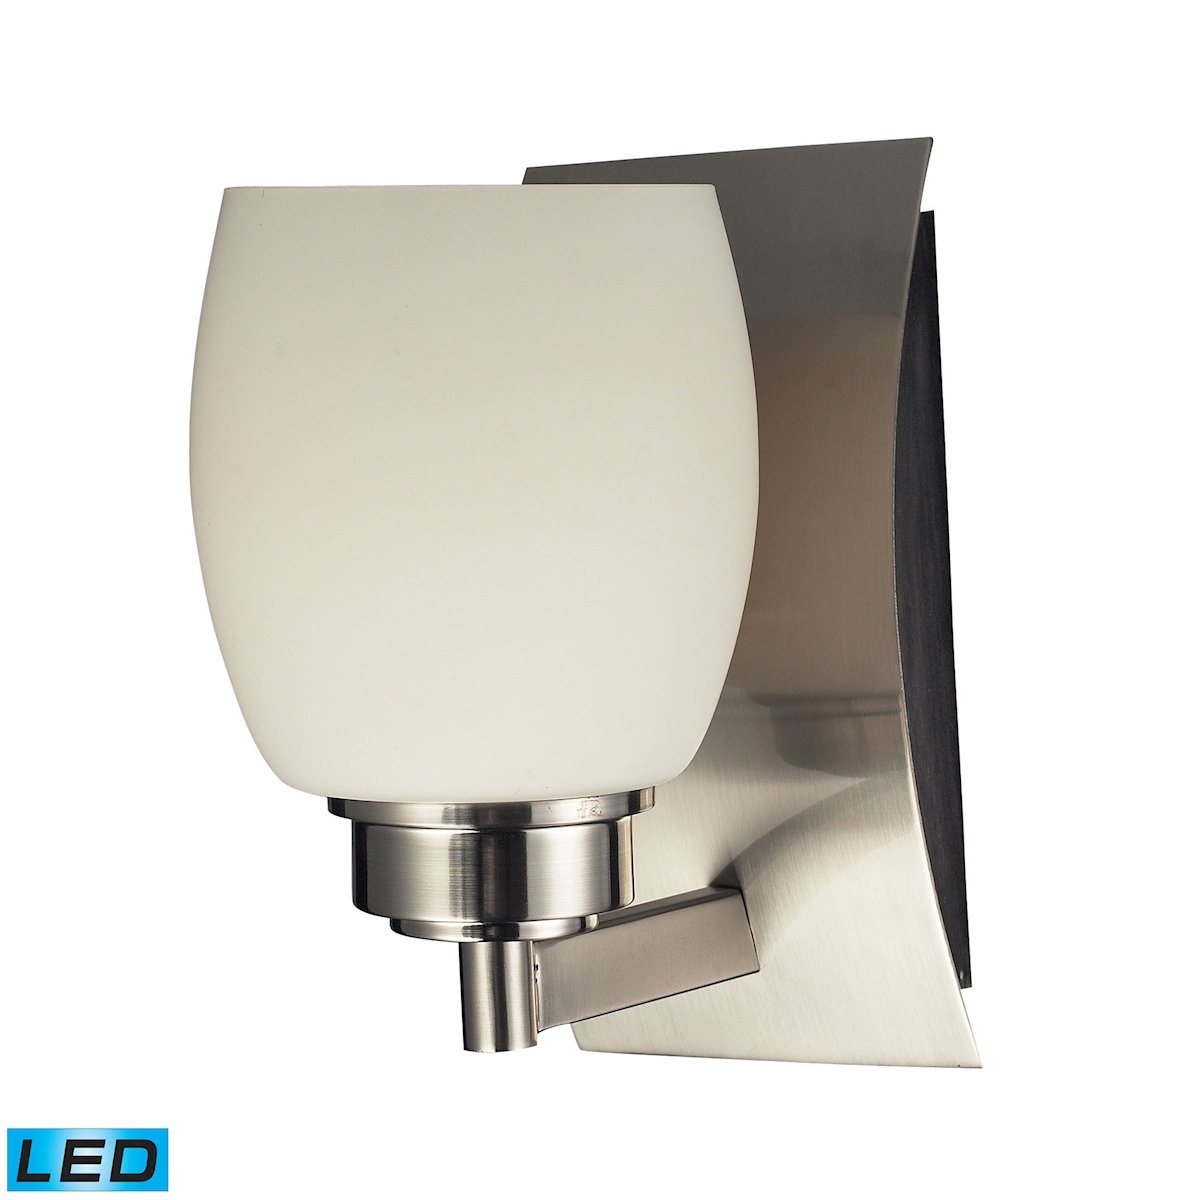 Northport 1 Light LED Vanity In Satin Nickel And Opal White Glass Wall Elk Lighting 